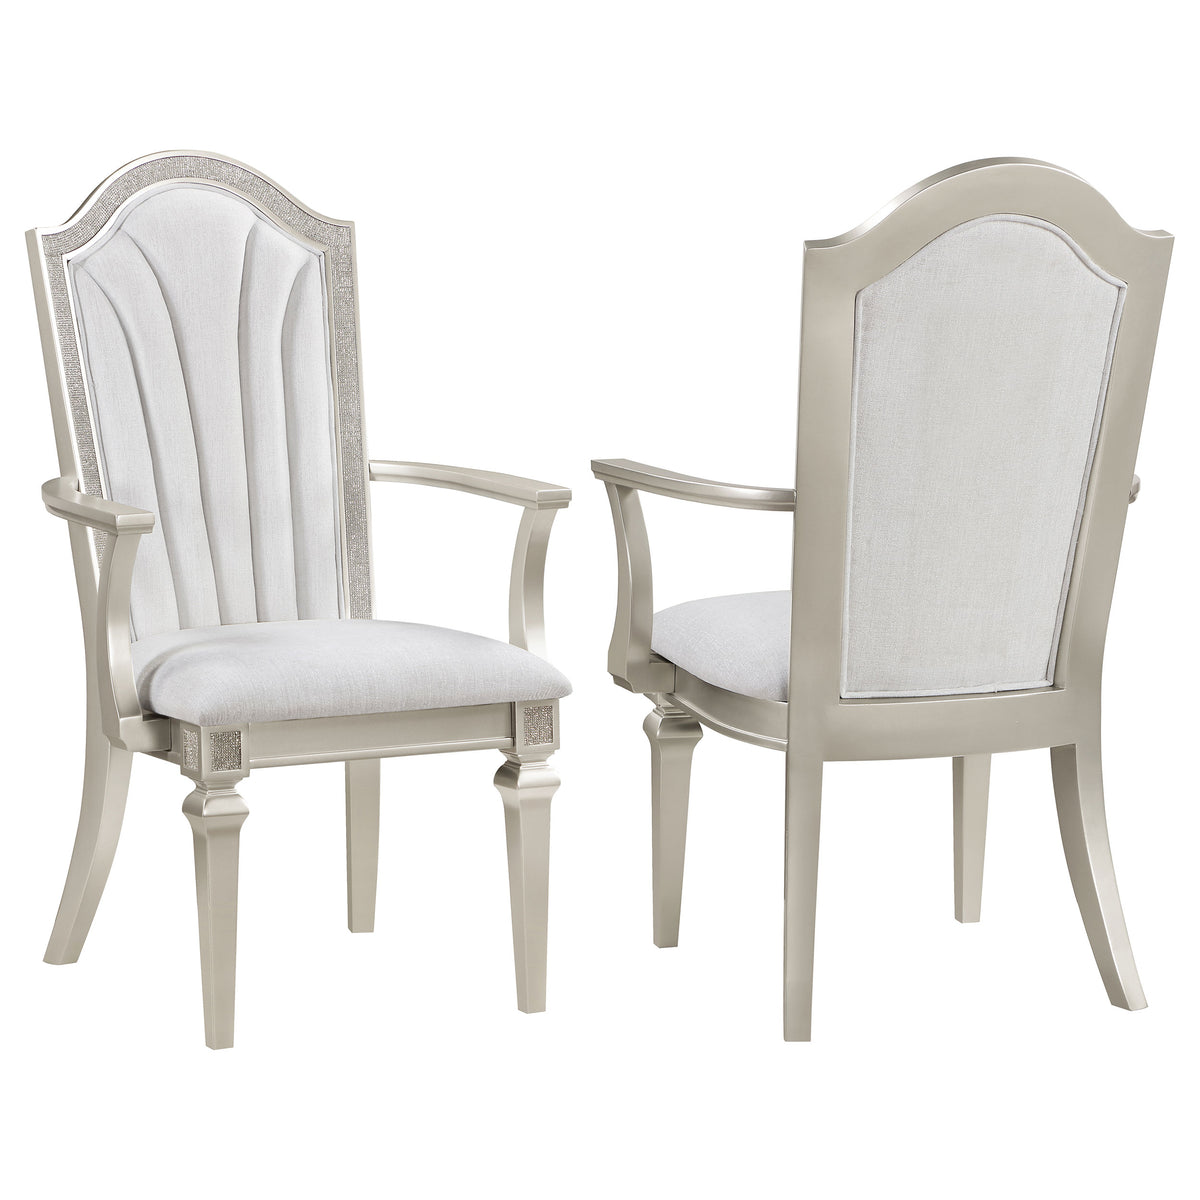 Evangeline Upholstered Dining Arm Chair with Faux Diamond Trim Ivory and Silver Oak (Set of 2)  Half Price Furniture